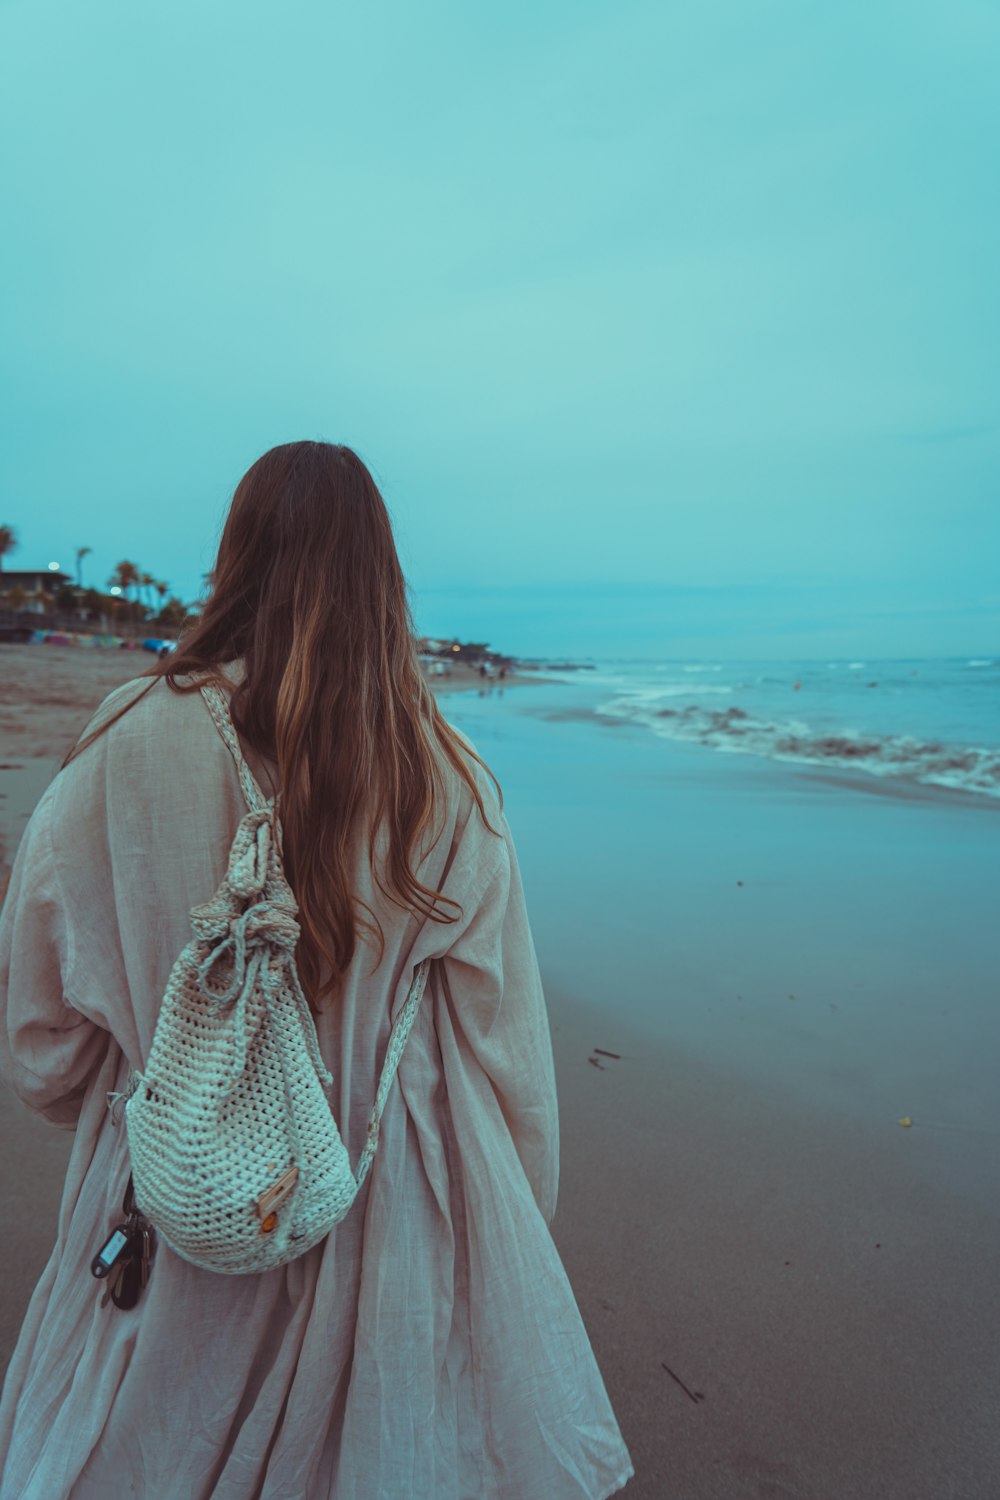 a woman walking on a beach carrying a purse